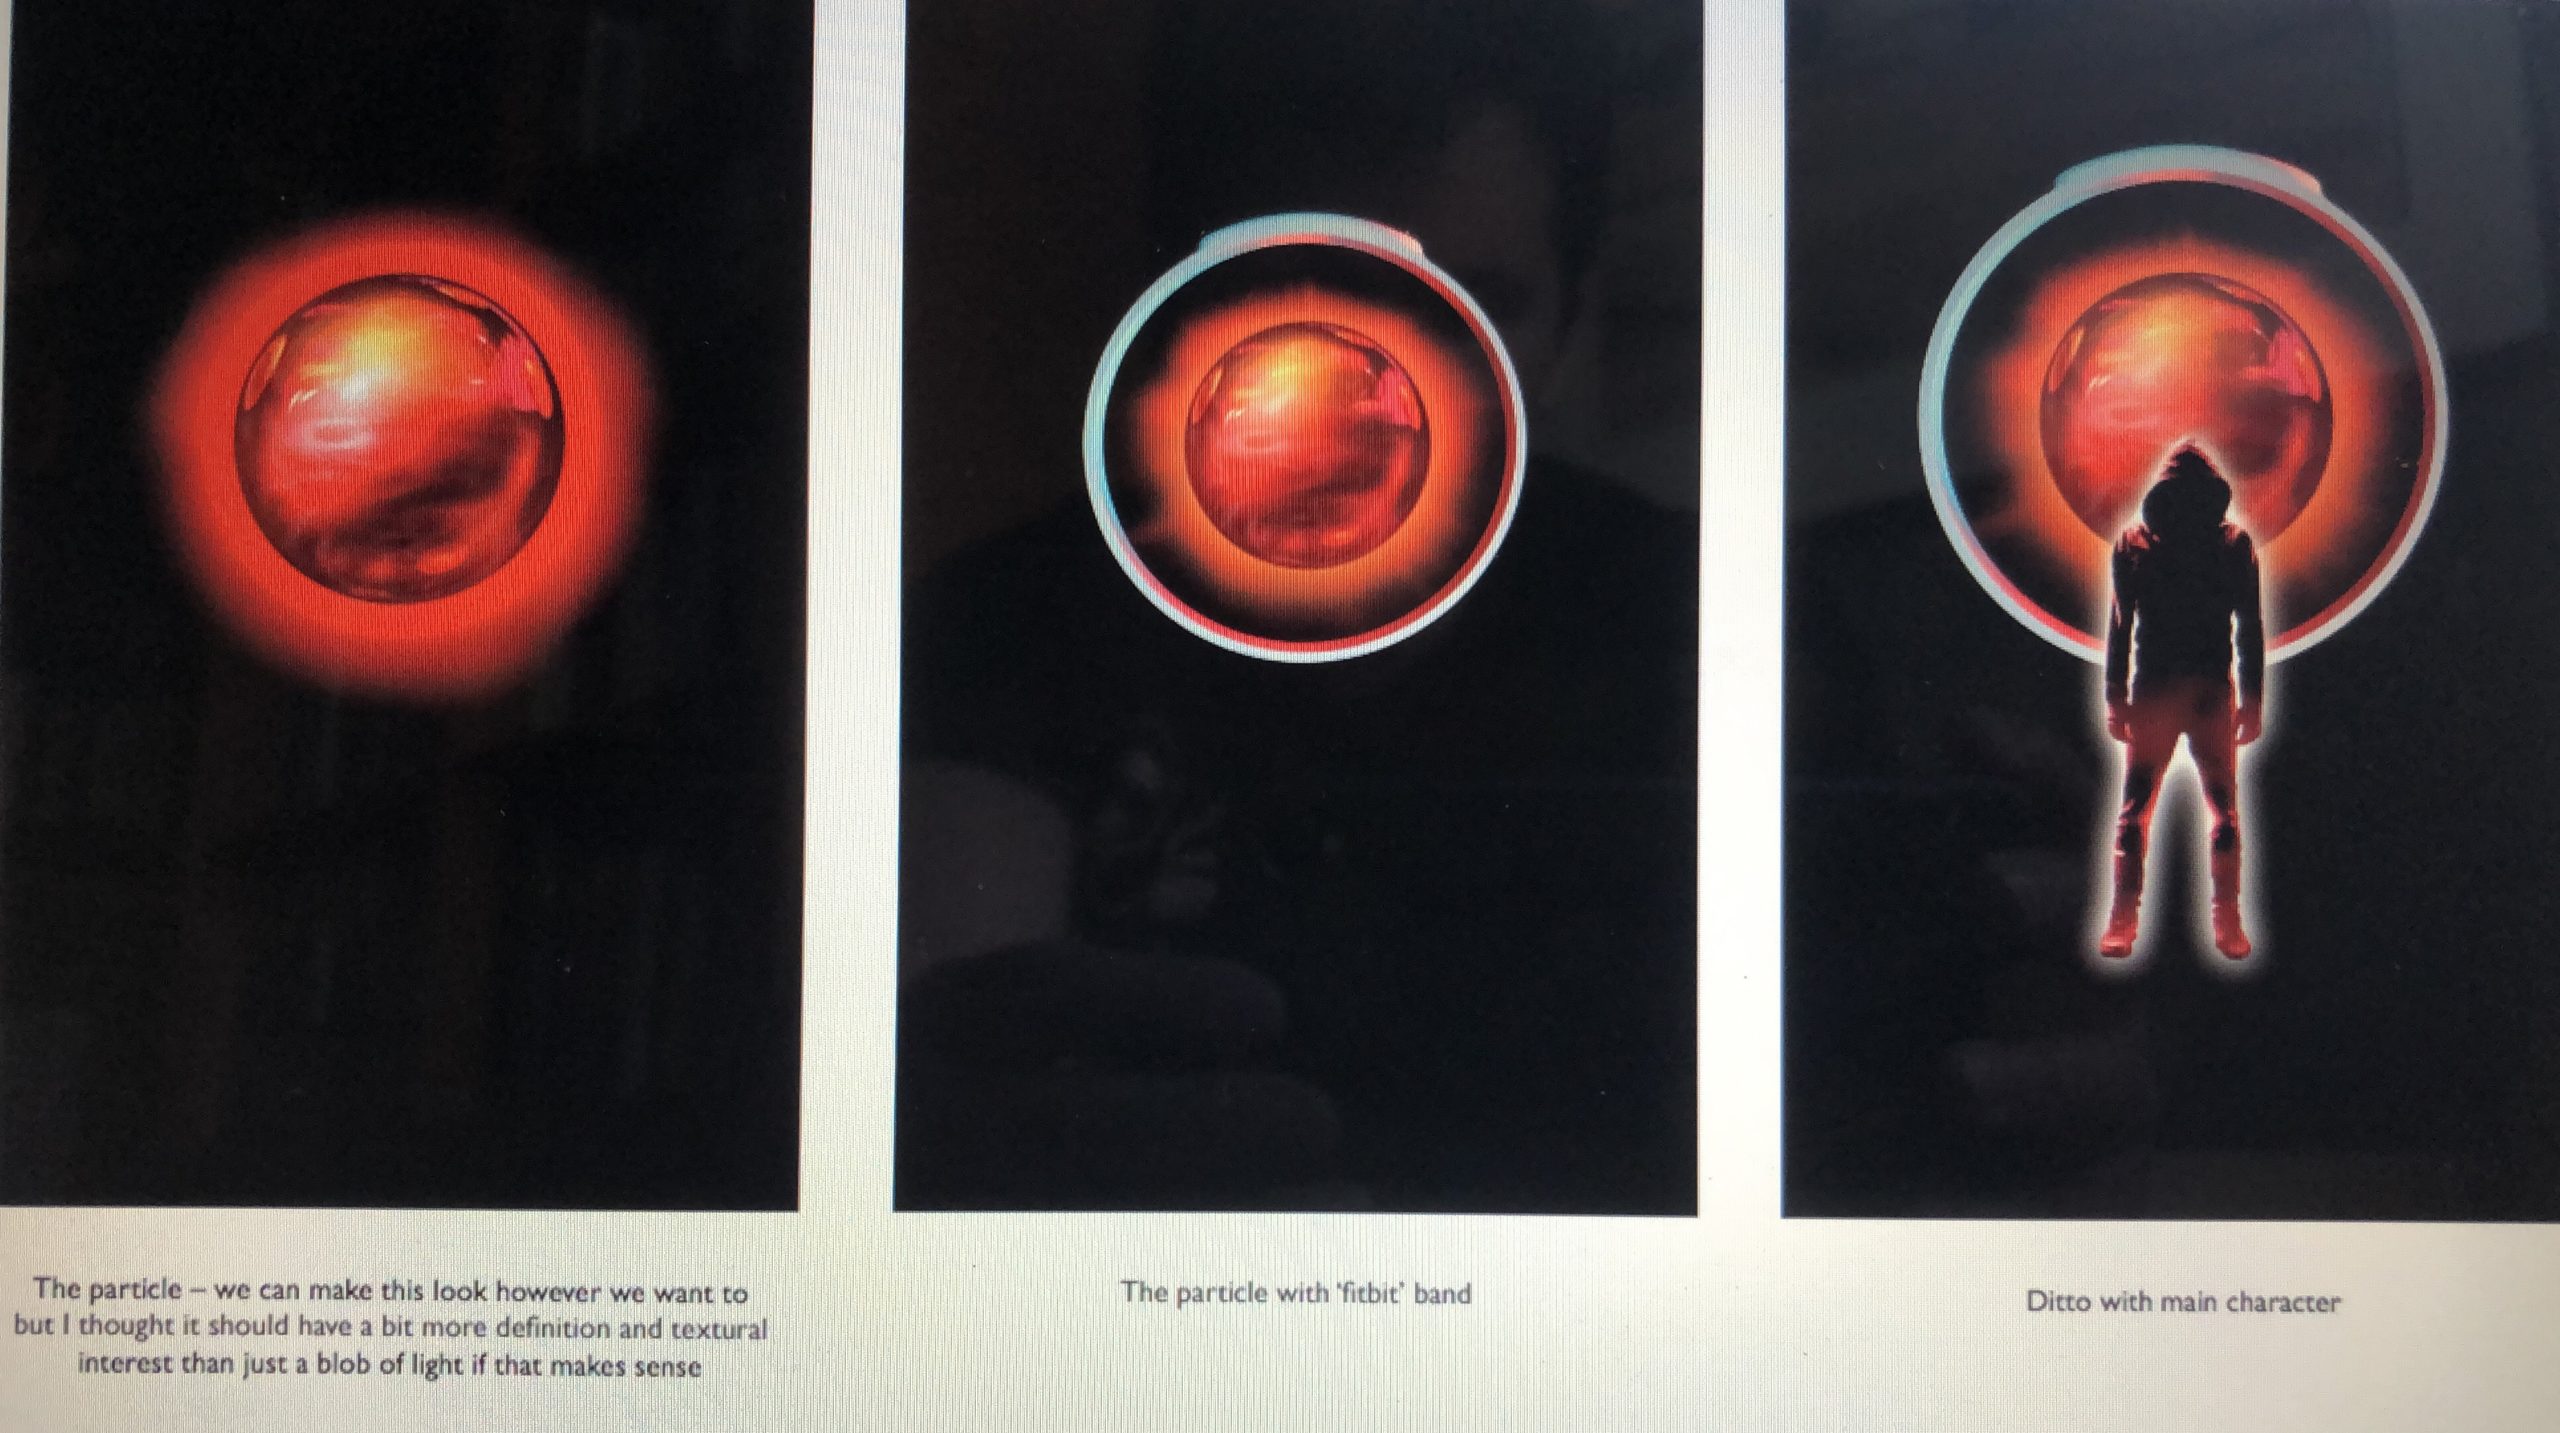 Three images of atoms on black backing